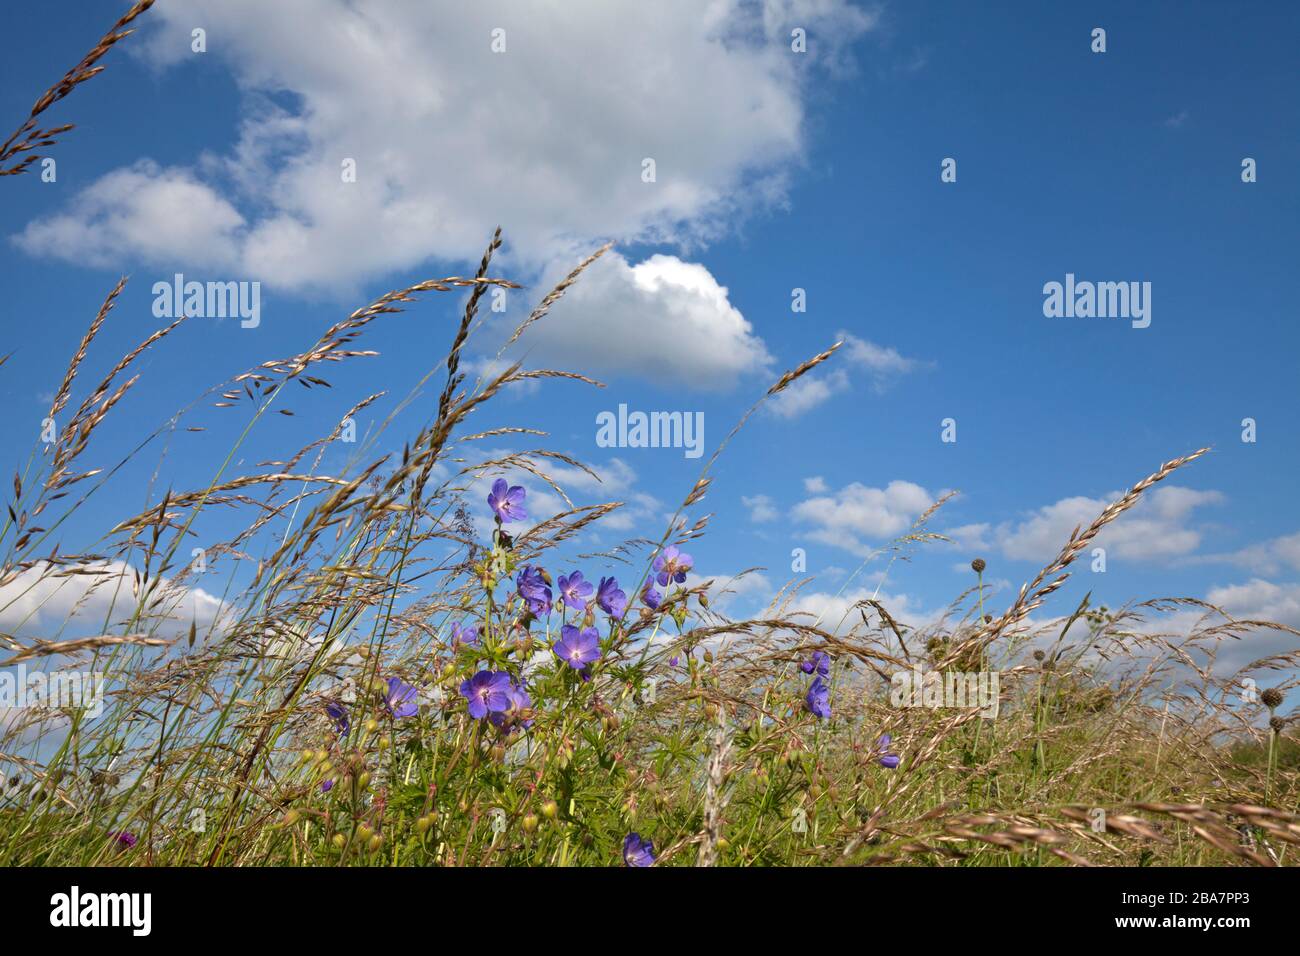 Meadow cranesbill flowers and grasses growing on hillside in Wiltshire. Stock Photo